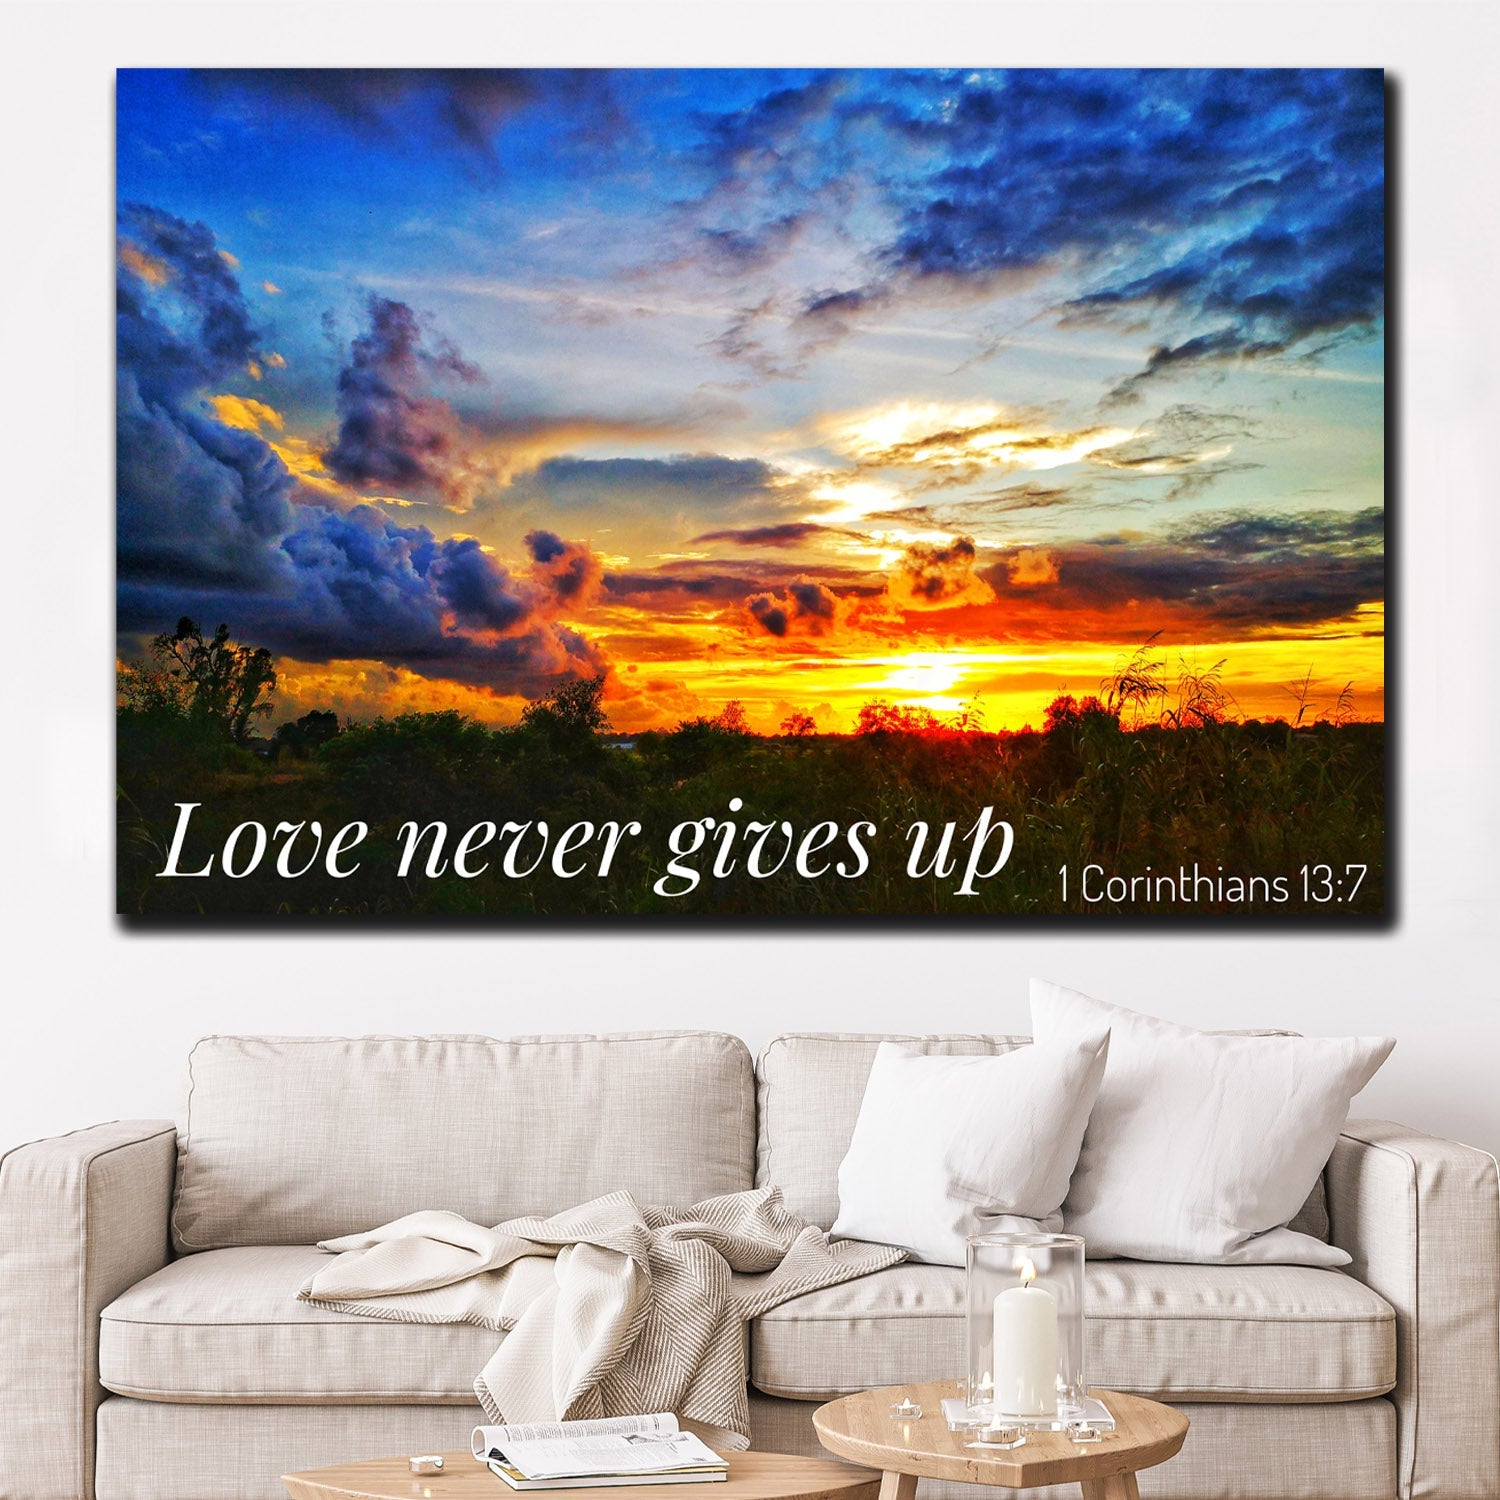 https://cdn.shopify.com/s/files/1/0387/9986/8044/products/LoveNeverGivesUpCanvasArtprintStretched-4.jpg